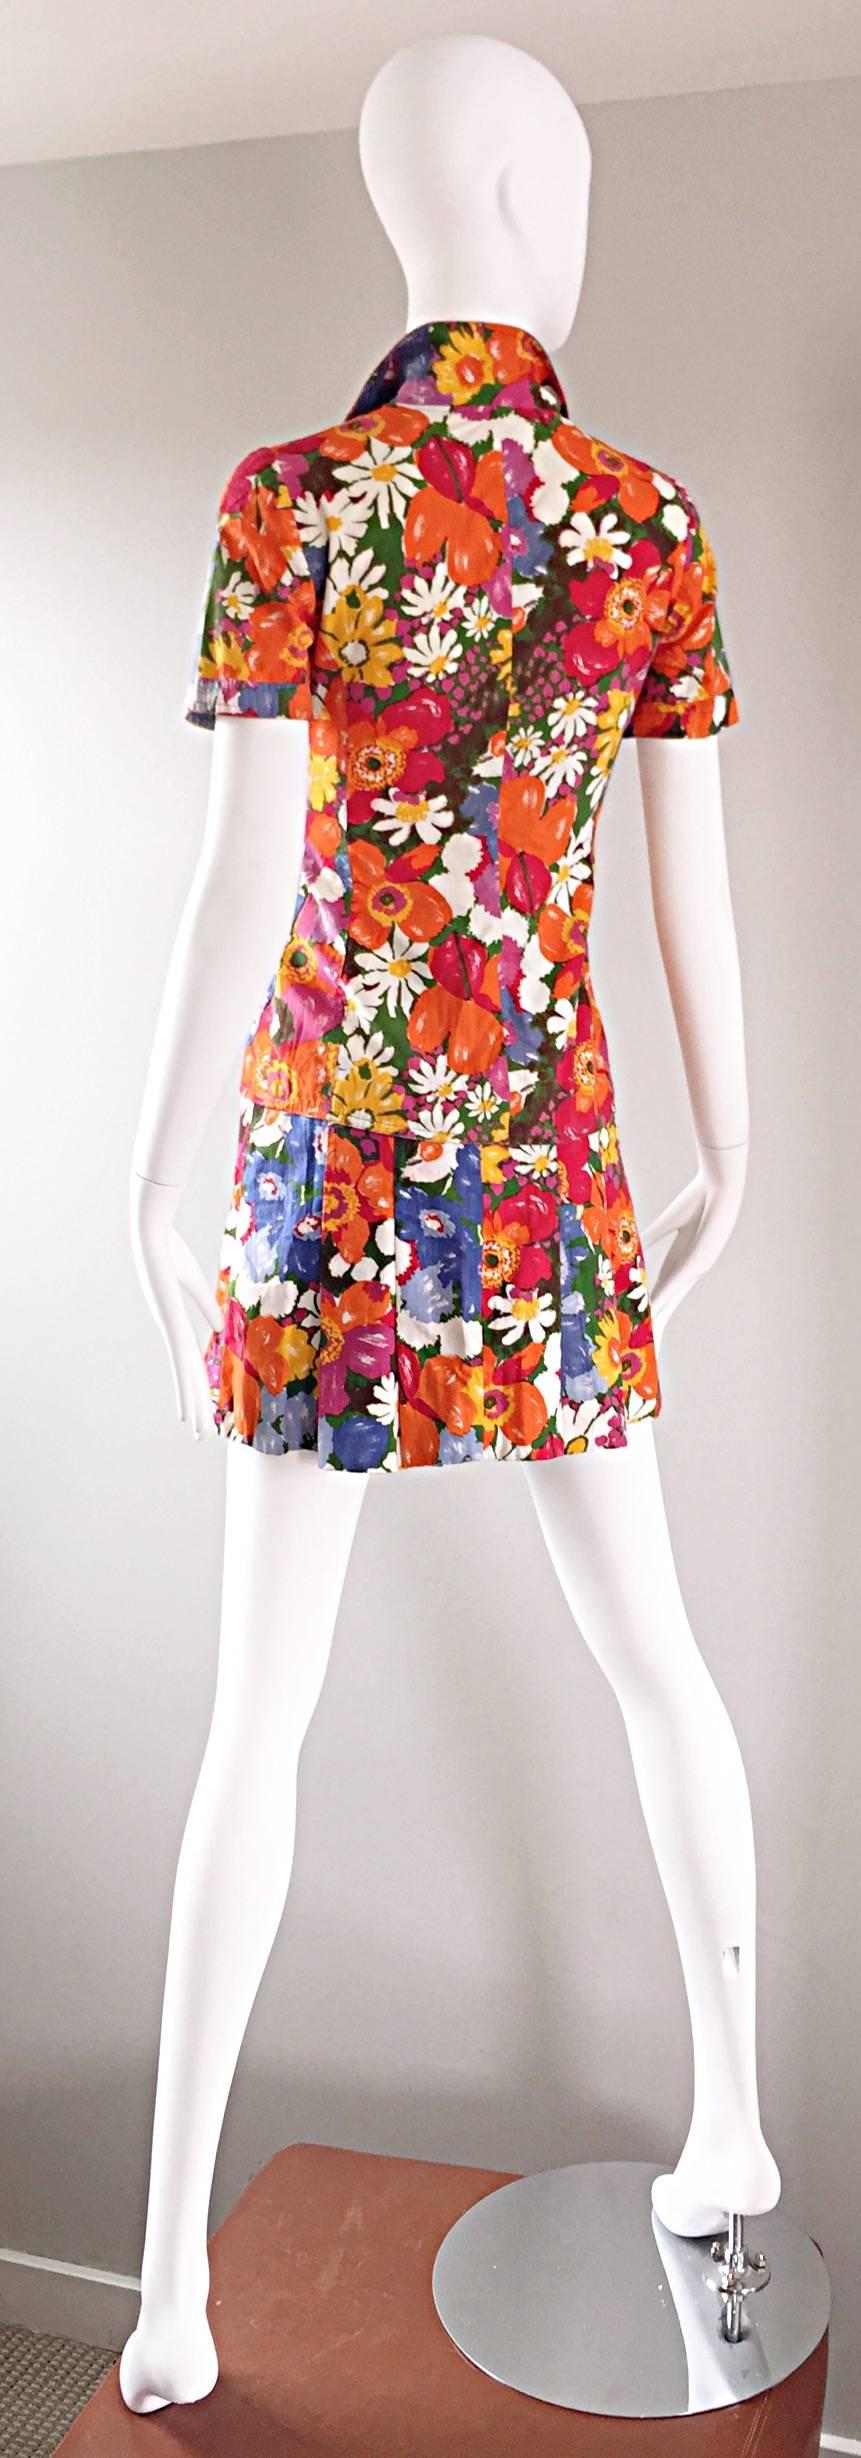 colorful flower dress